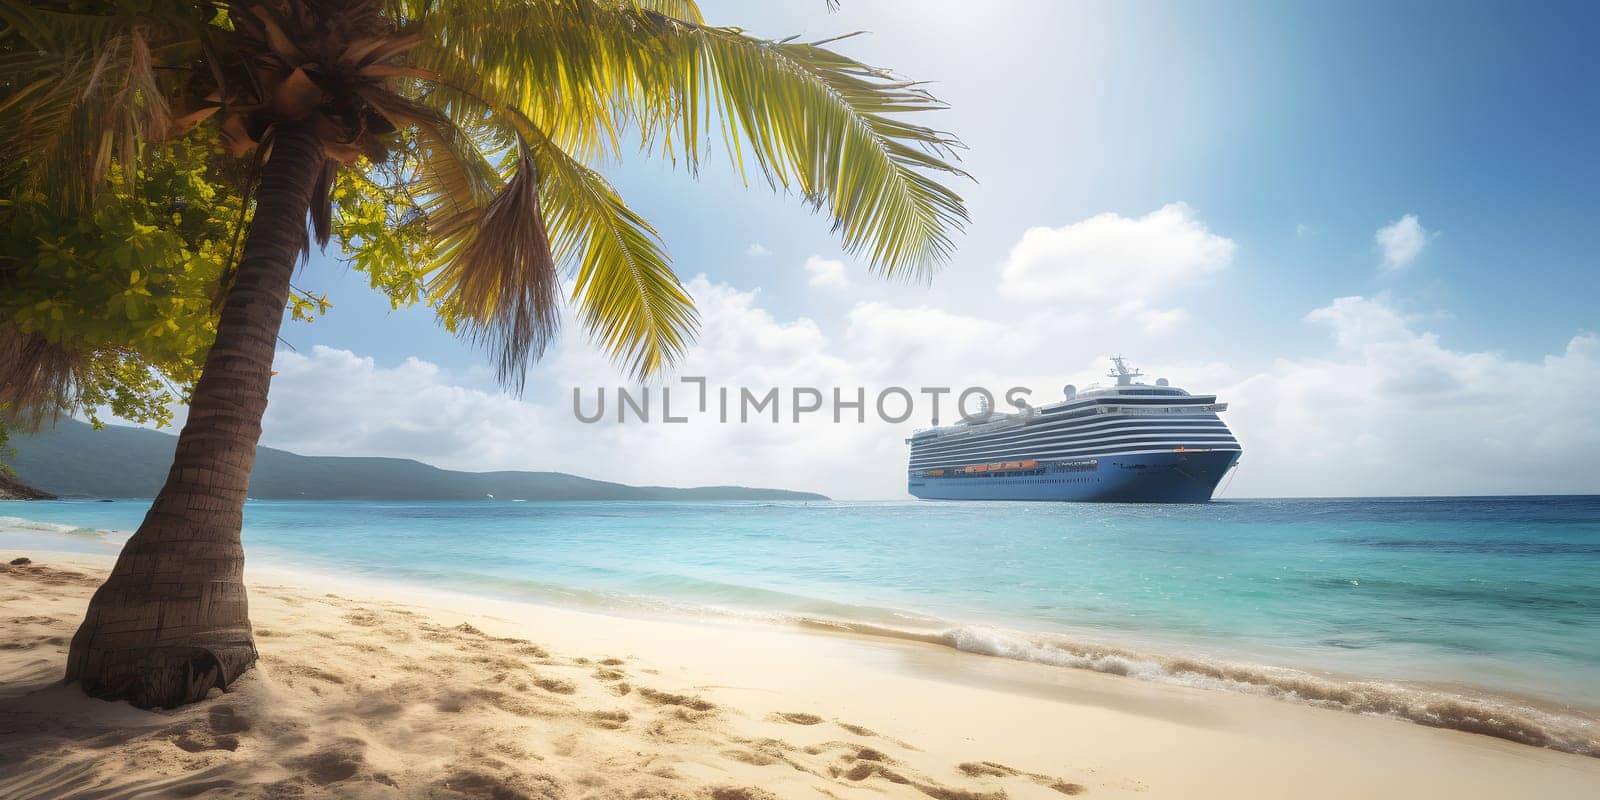 Large cruise liner in the background with a palm tree on white sand coral beach, neural network generated photorealistic image by z1b